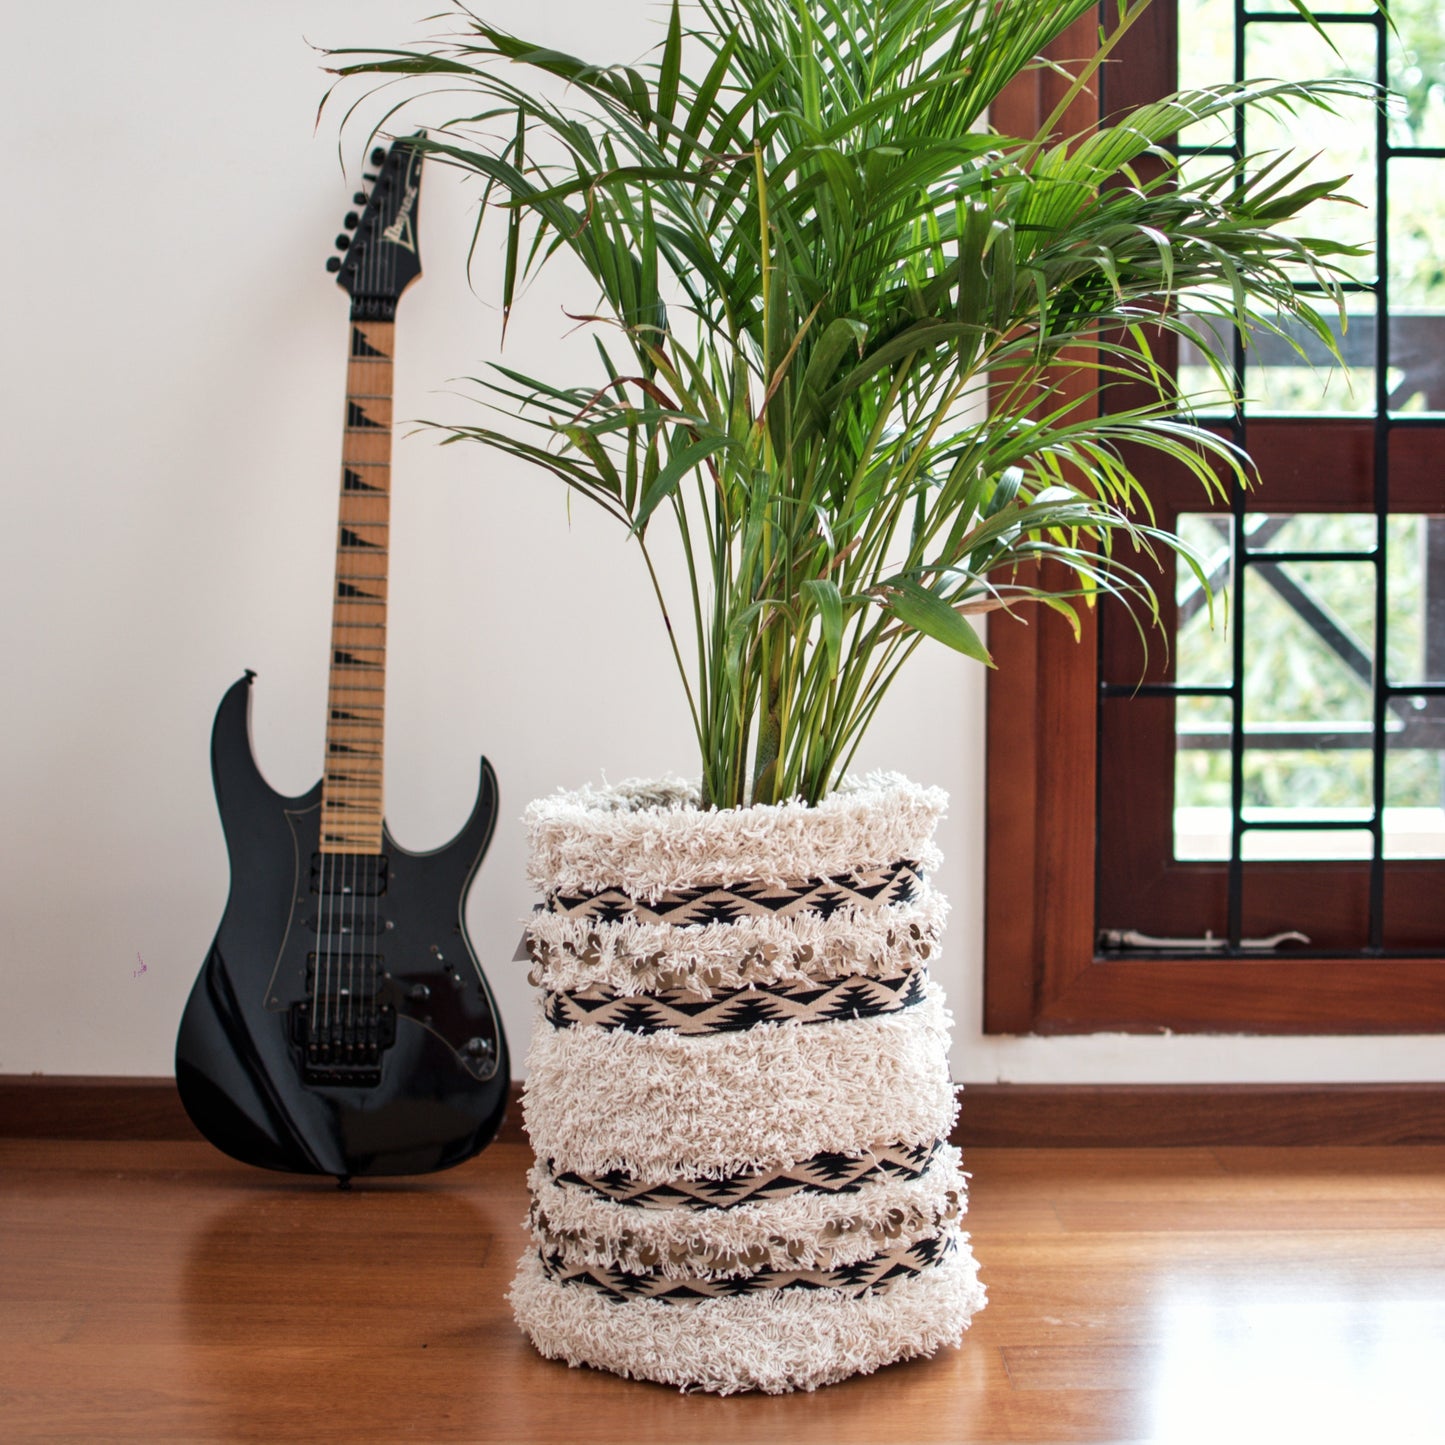 Iris - Handwoven basket used as planter in bohemian homes